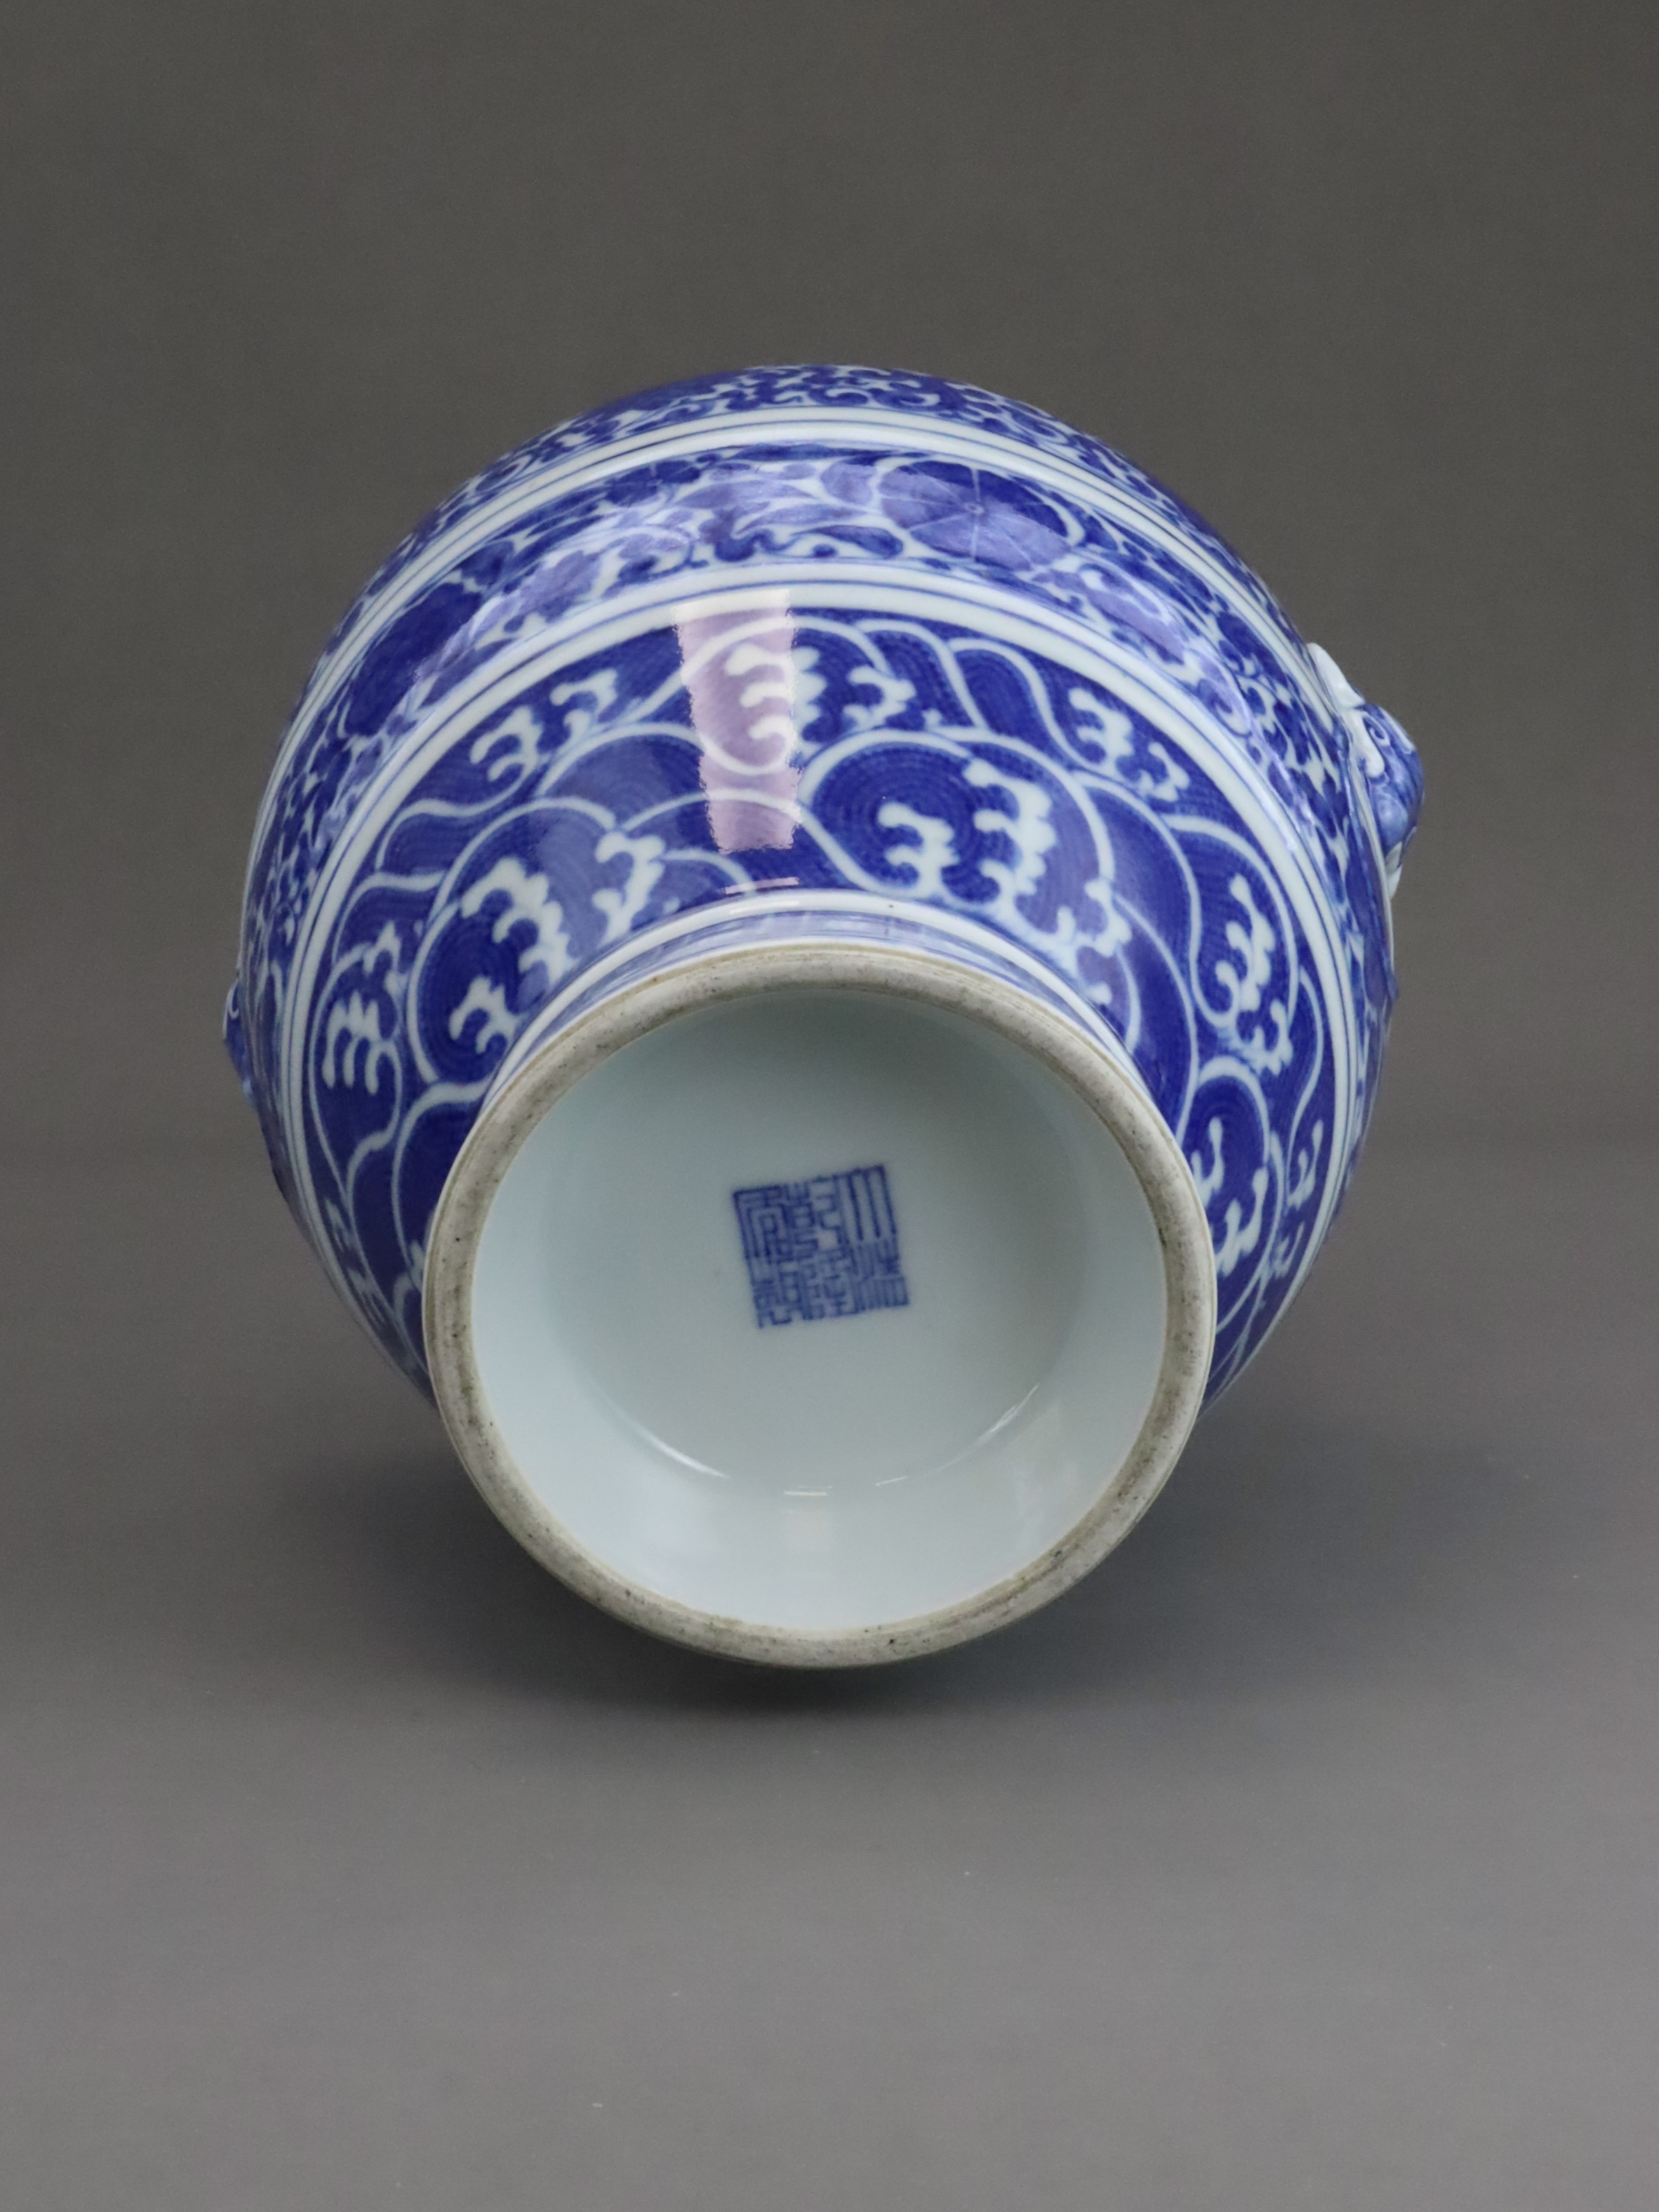 A Good Blue and White Ming style Vase, hu, six character seal mark of Qianlong, Qing dynasty, - Image 9 of 9